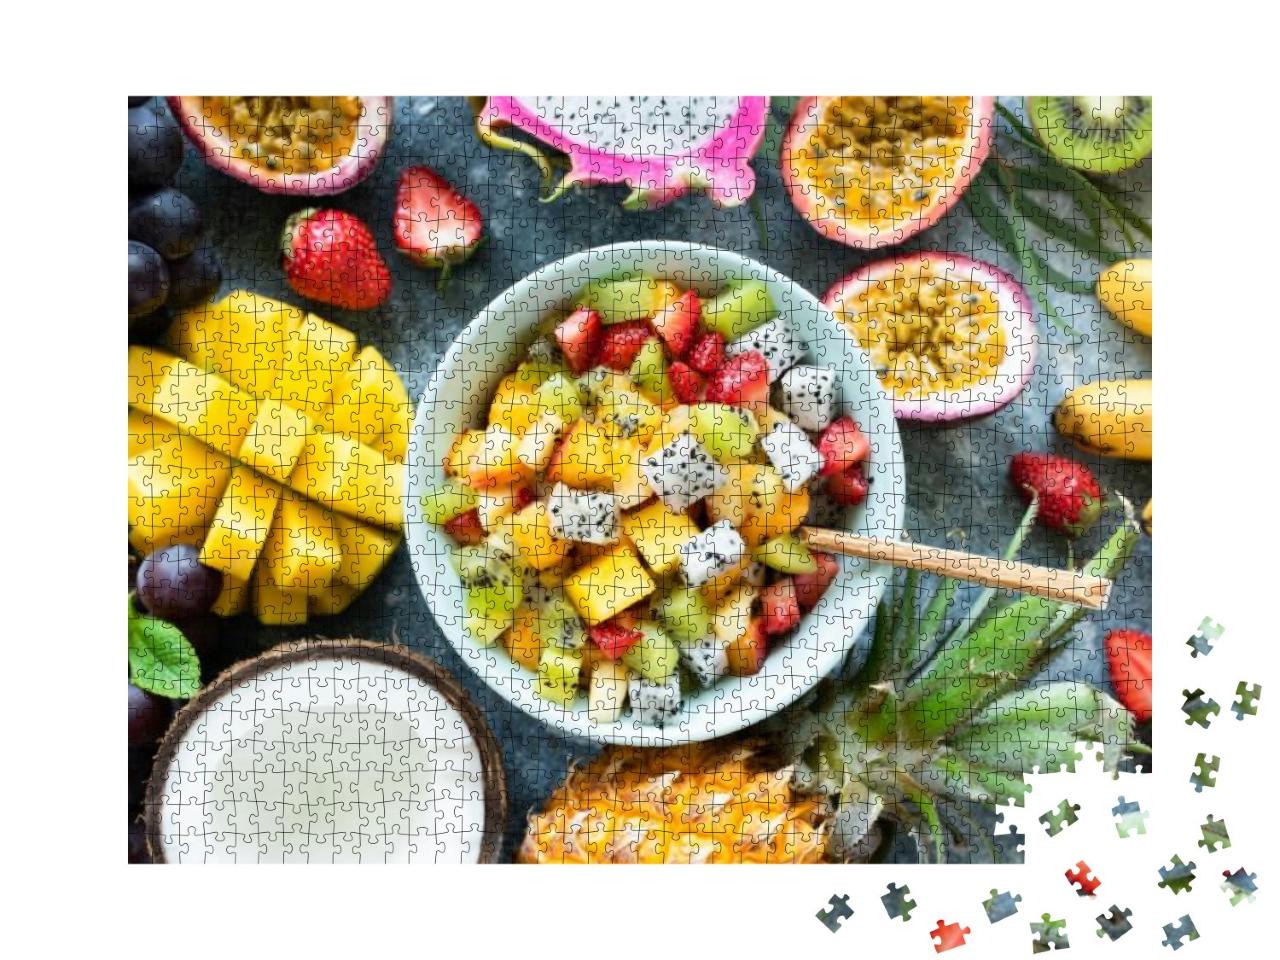 Tropical Fruit Salad with Mango & Pitaya in Bowl. Healthy... Jigsaw Puzzle with 1000 pieces